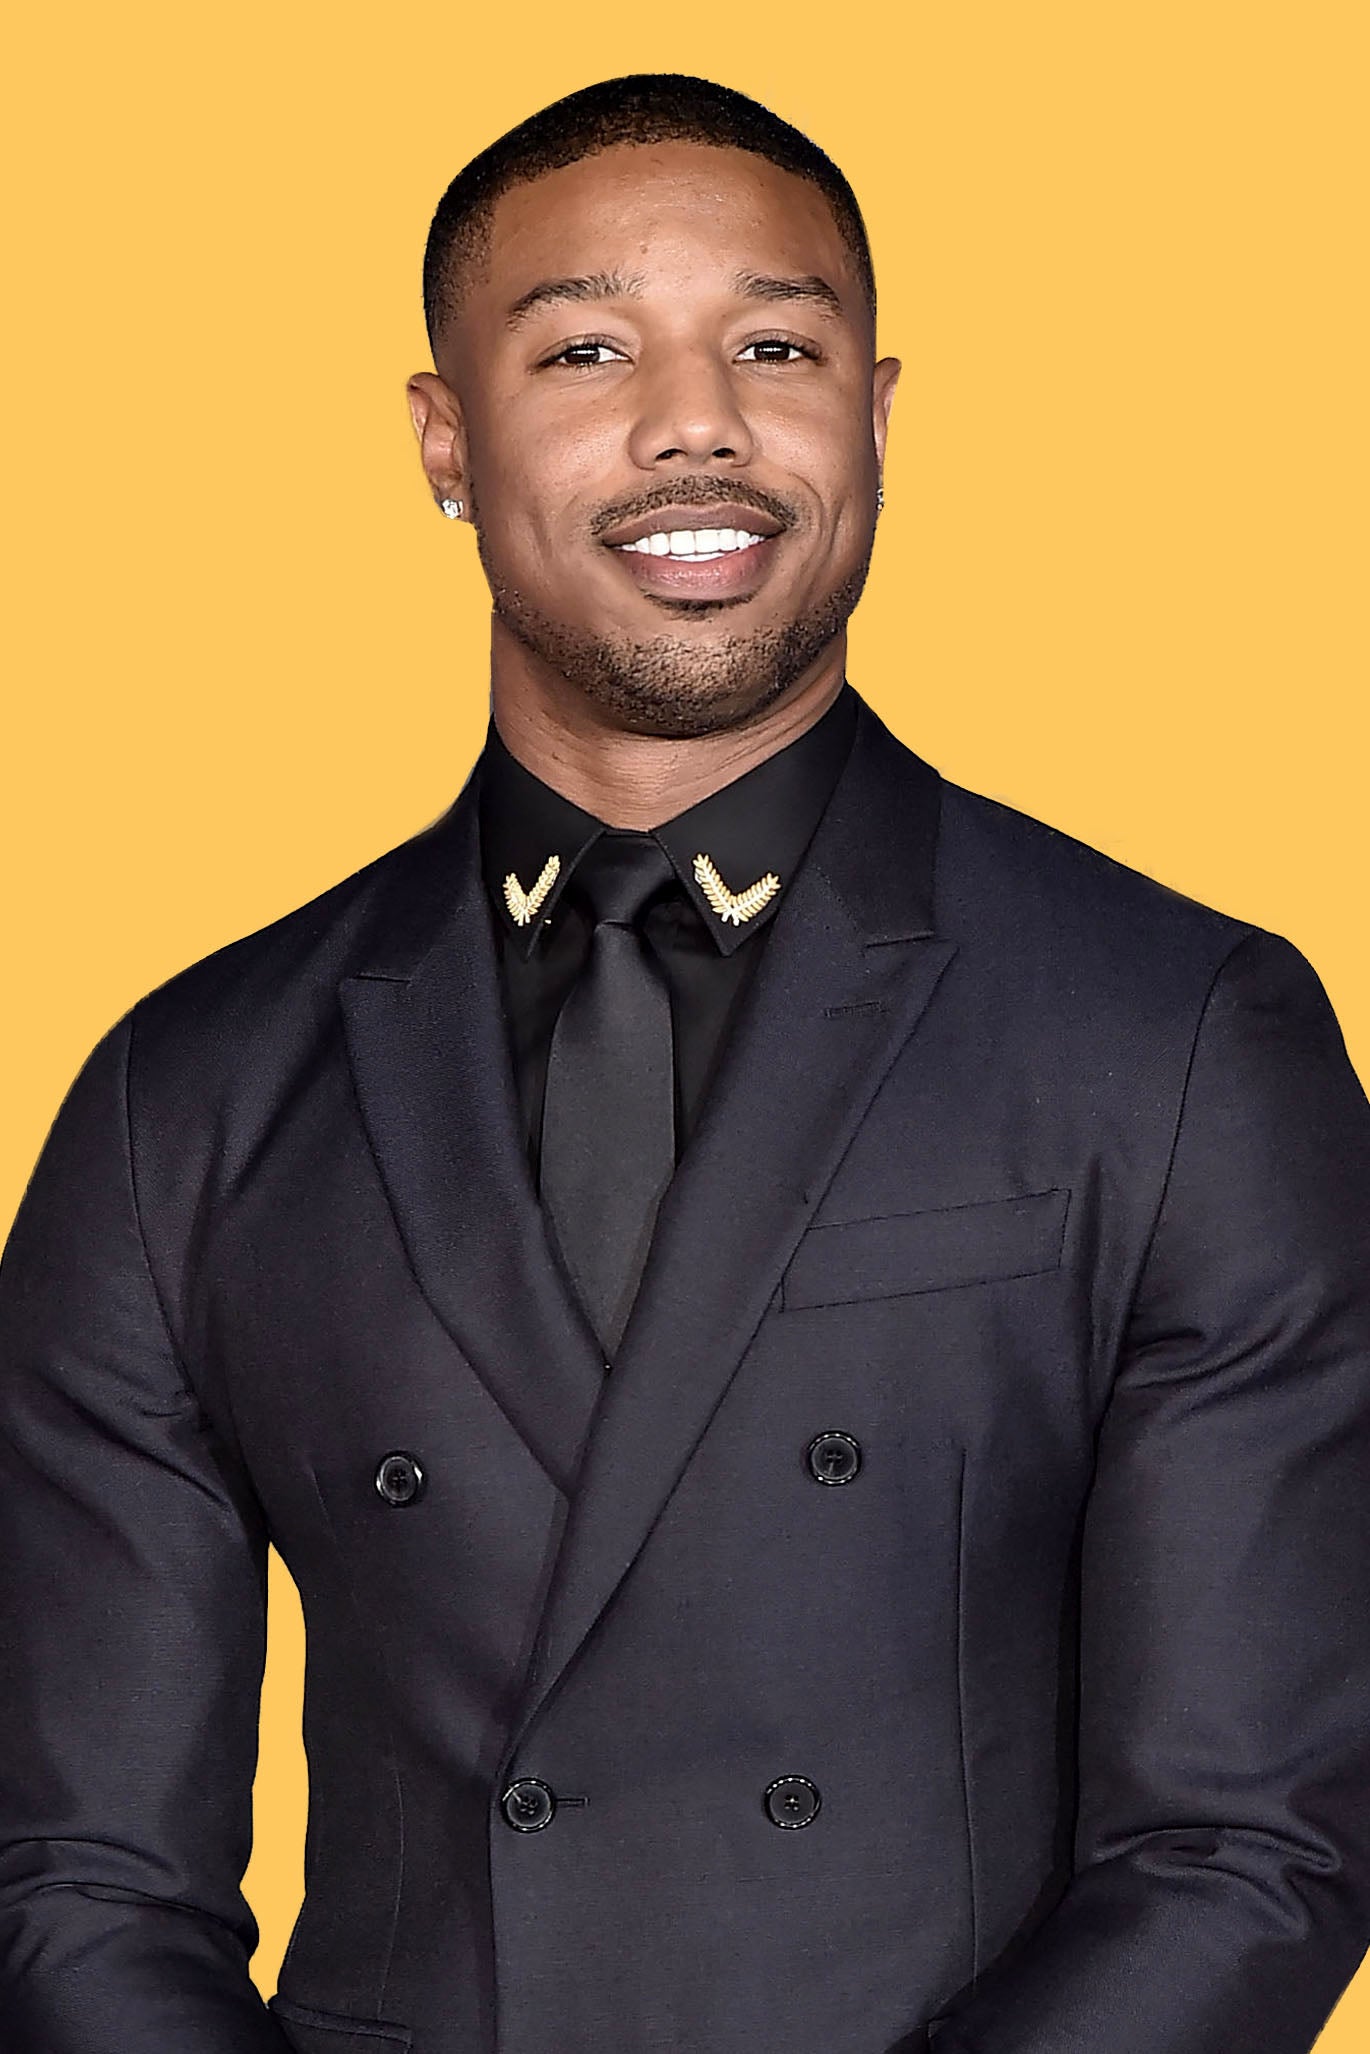 Some Fans Are Not Happy About Michael B. Jordan’s Comments On Black Folklore